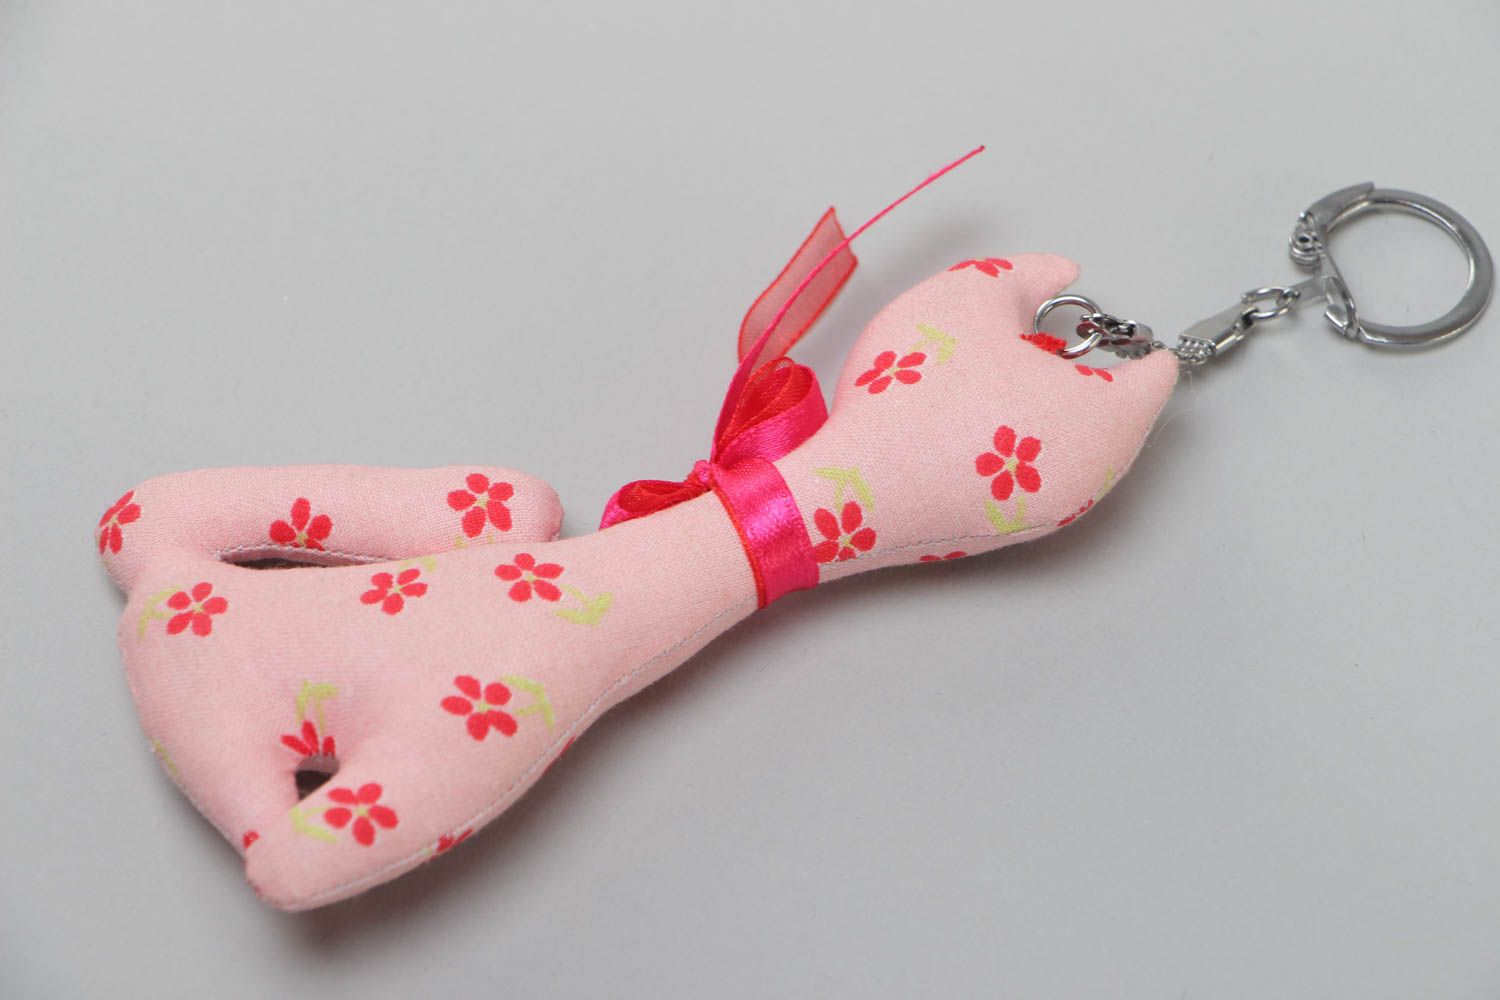 Handmade soft toy keychain sewn of pink polka dot cotton fabric in the shape of cat photo 4